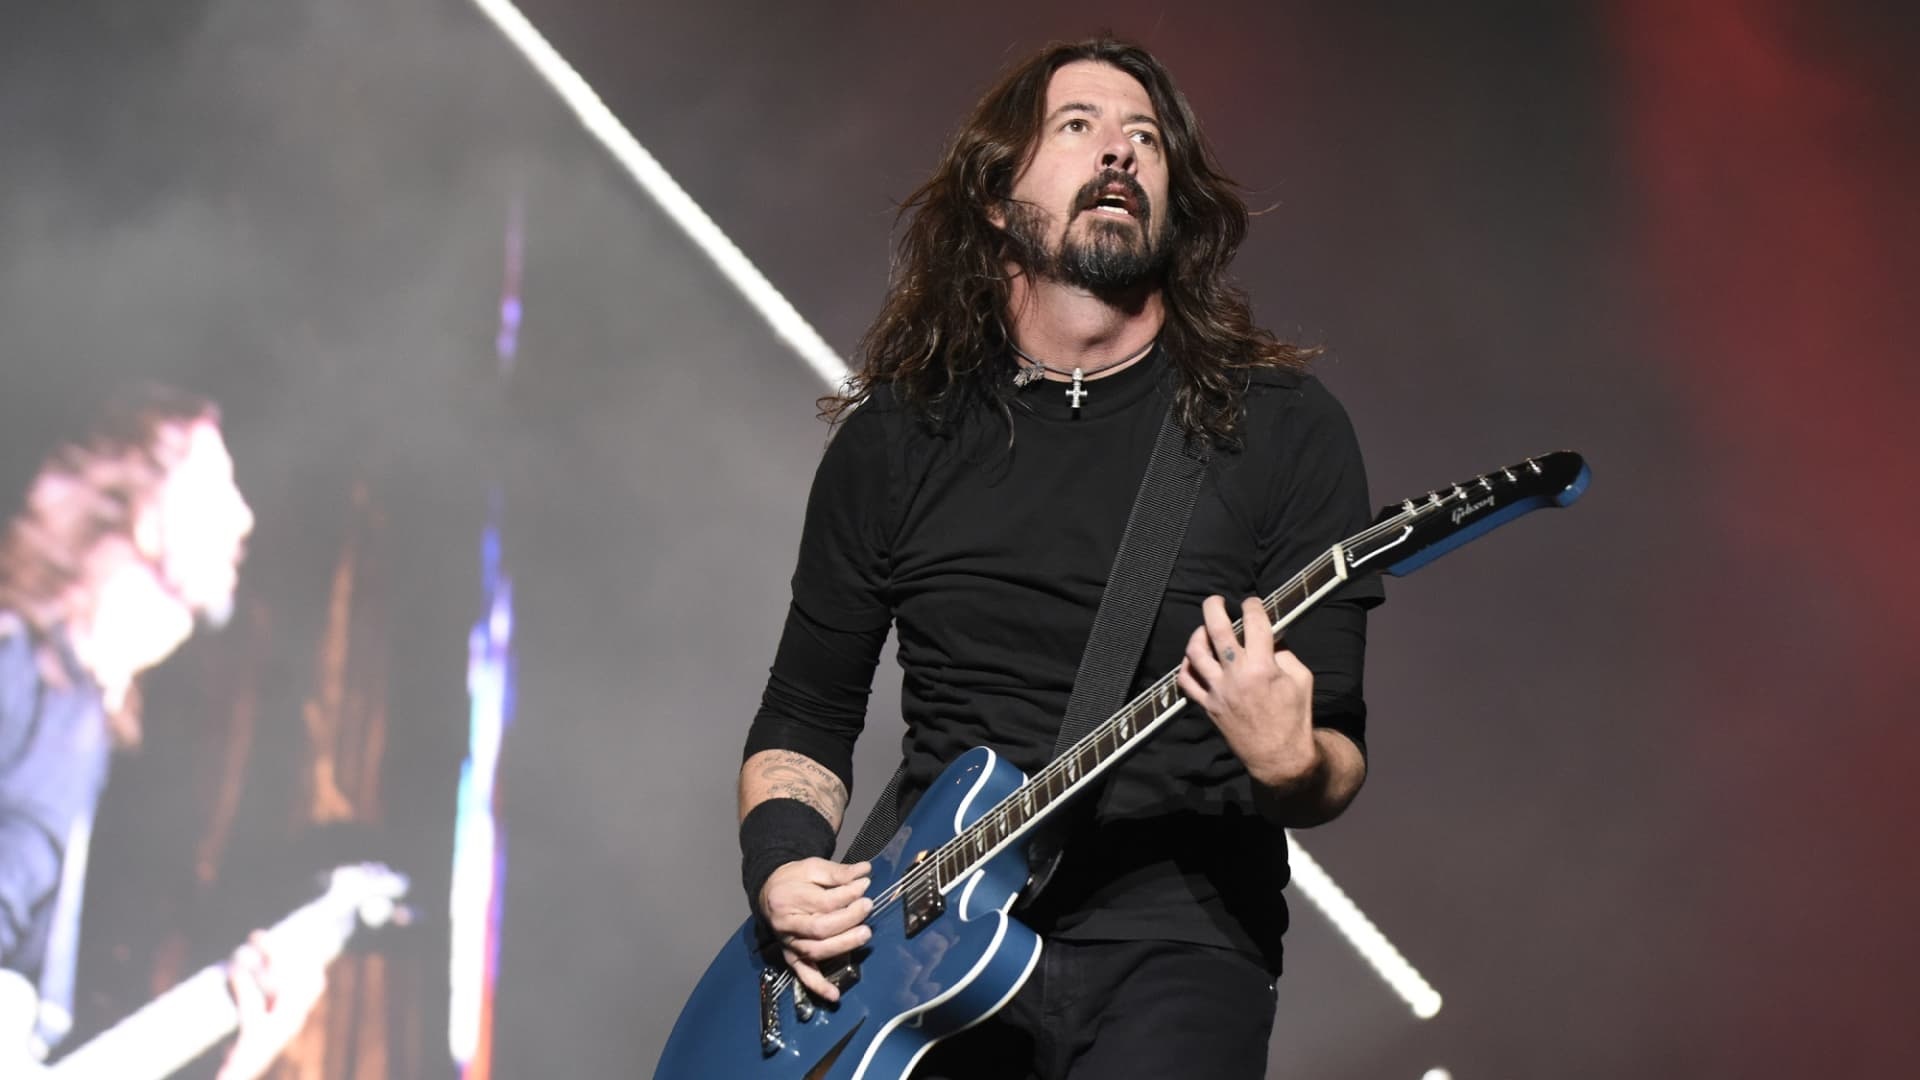 Dave Grohl, Foo Fighters, Amazing wallpapers, Acclaimed musician, 1920x1080 Full HD Desktop